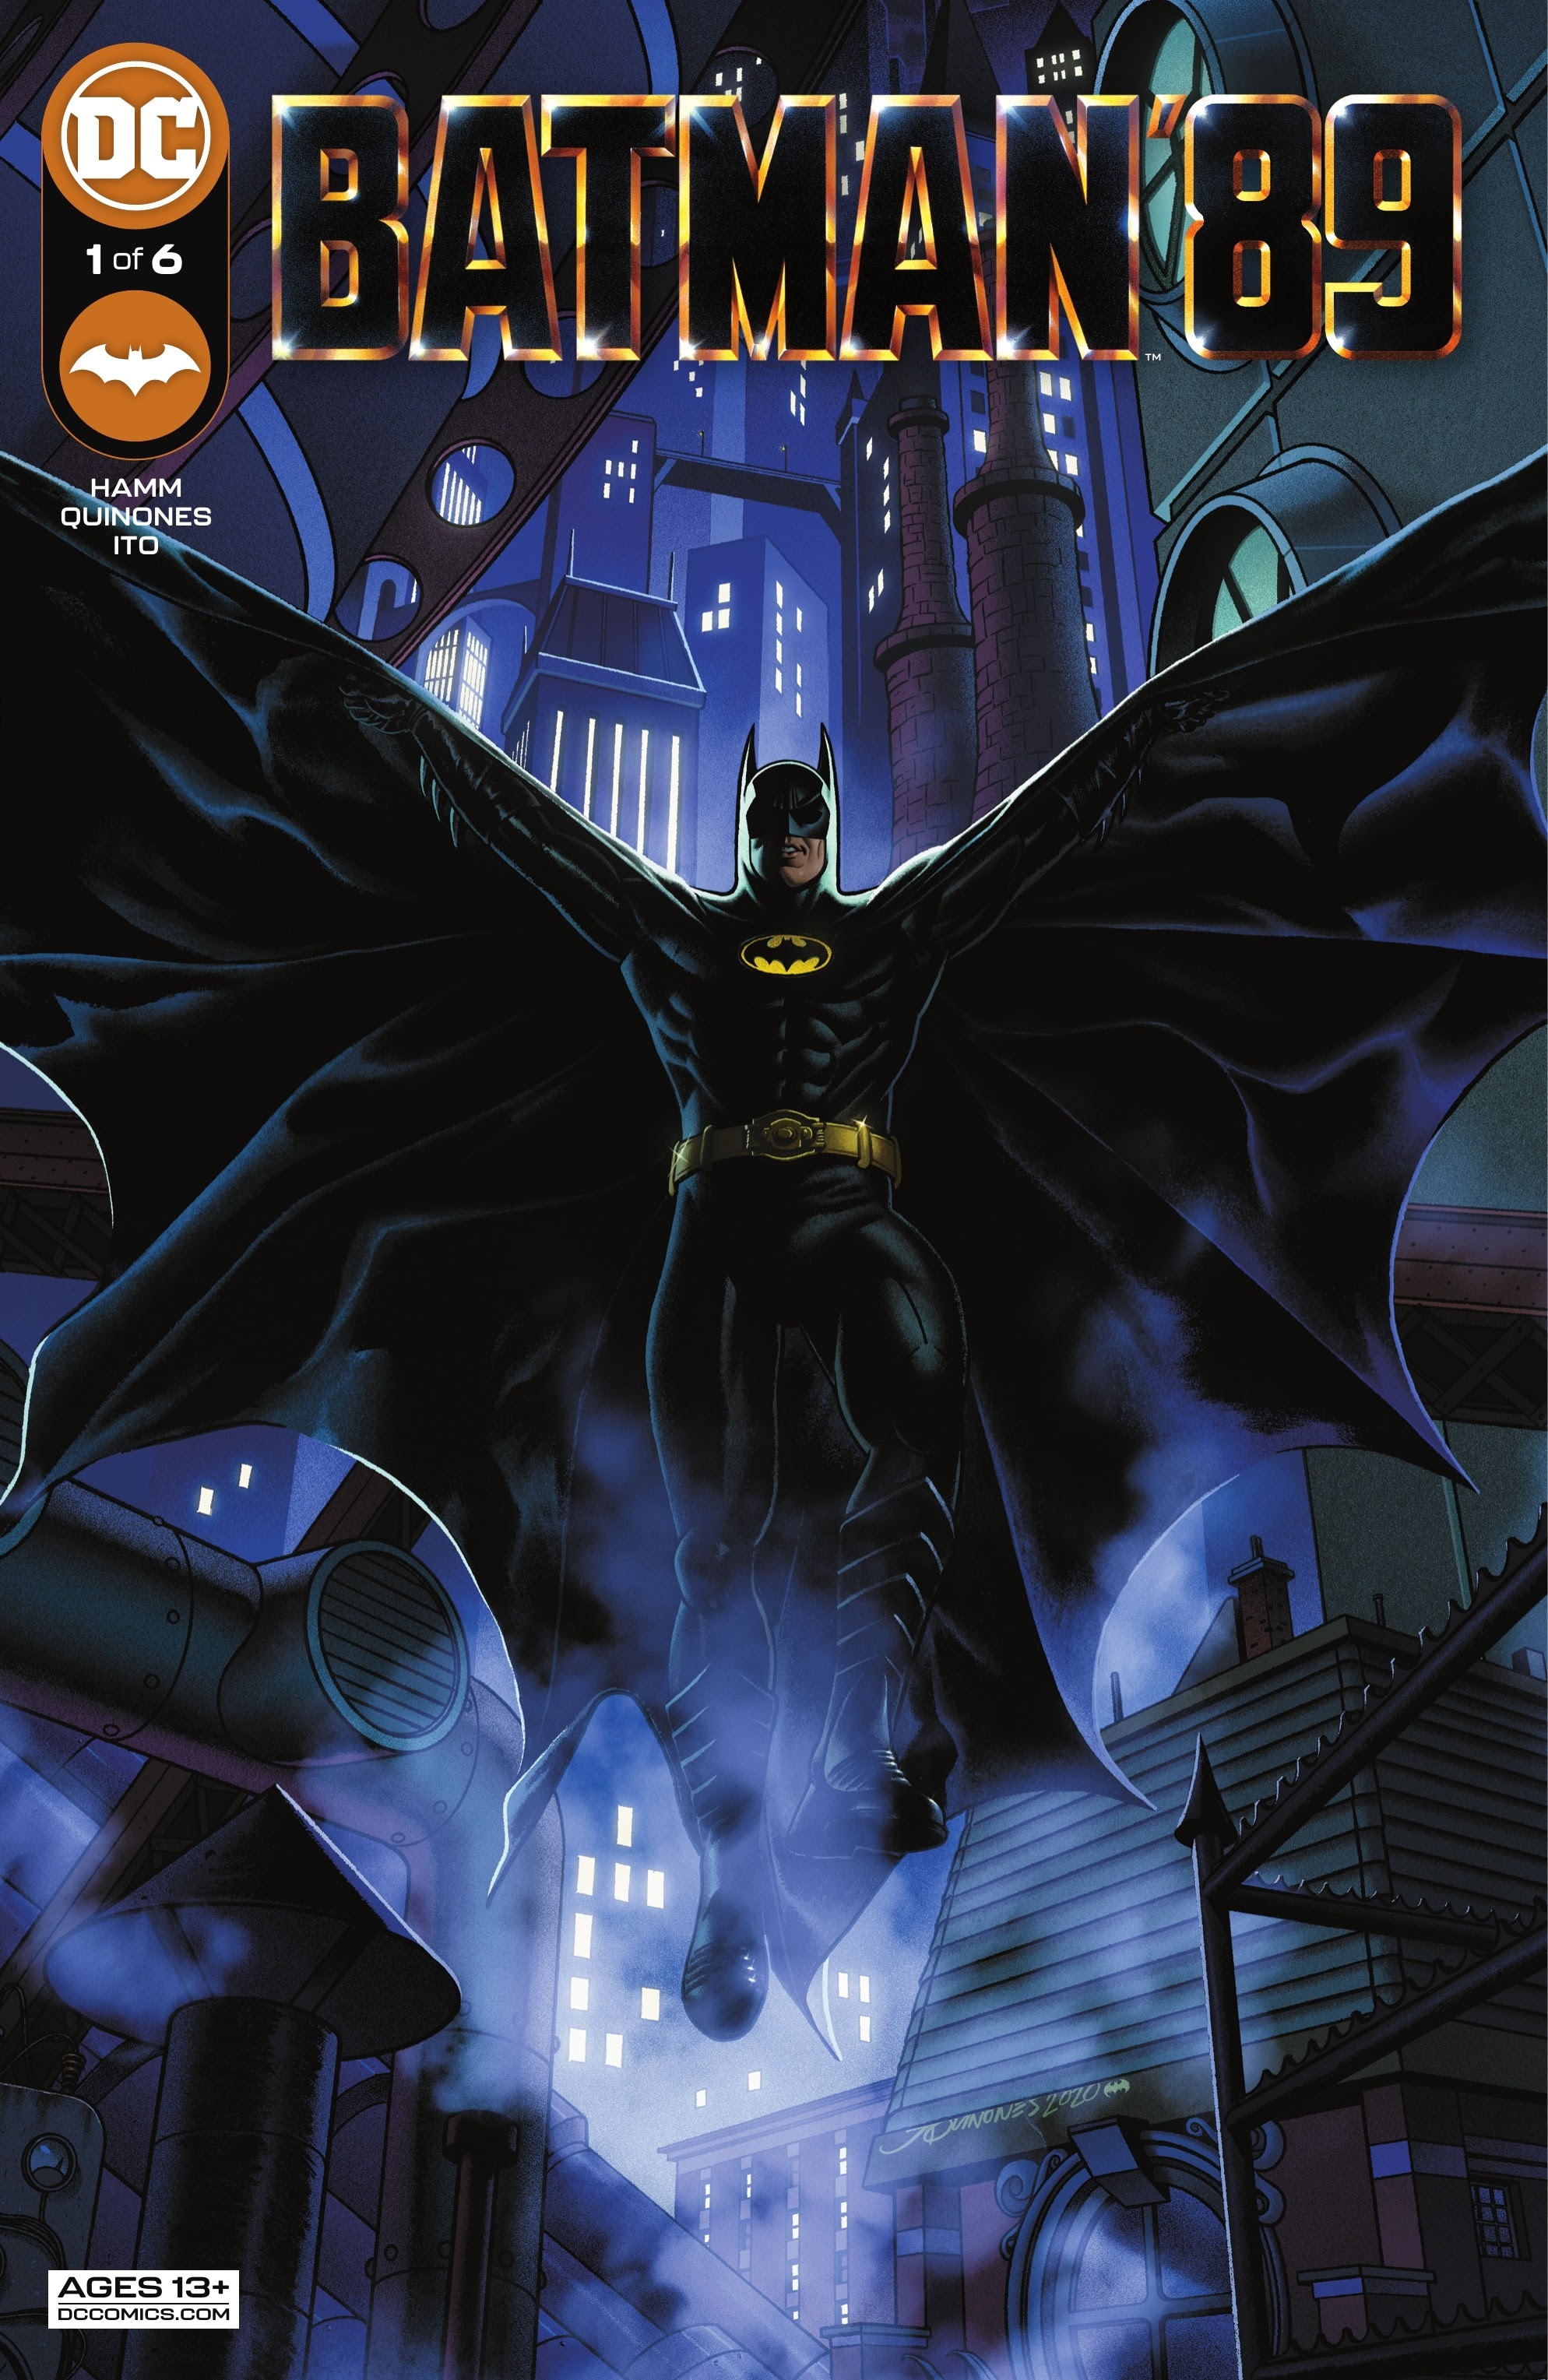 Batman 89 Issue 1 | Read Batman 89 Issue 1 comic online in high quality.  Read Full Comic online for free - Read comics online in high quality  .|